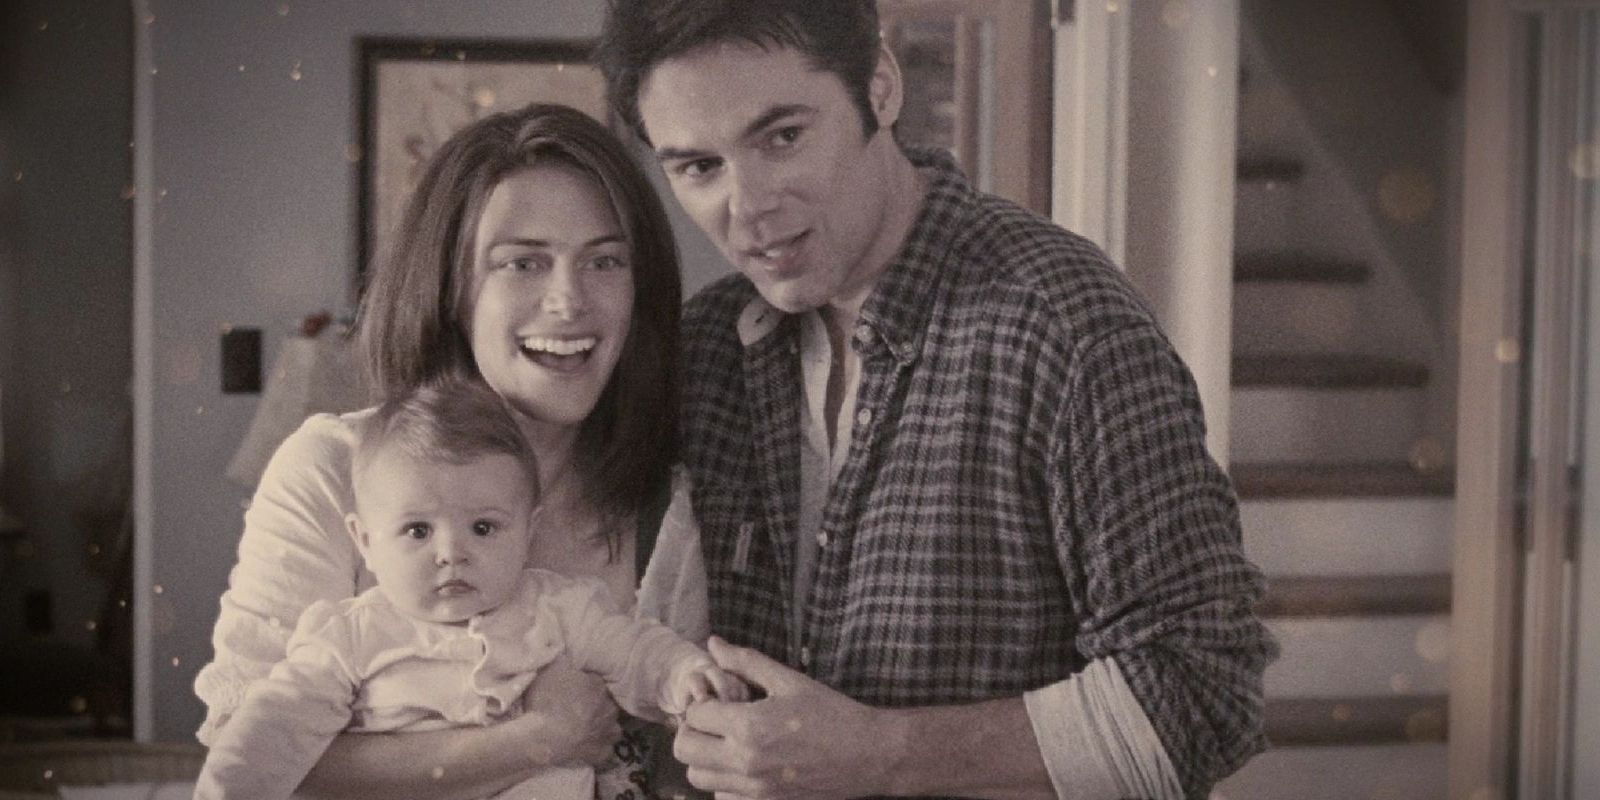 A young Renee and Charlie holding baby Bella and smiling 